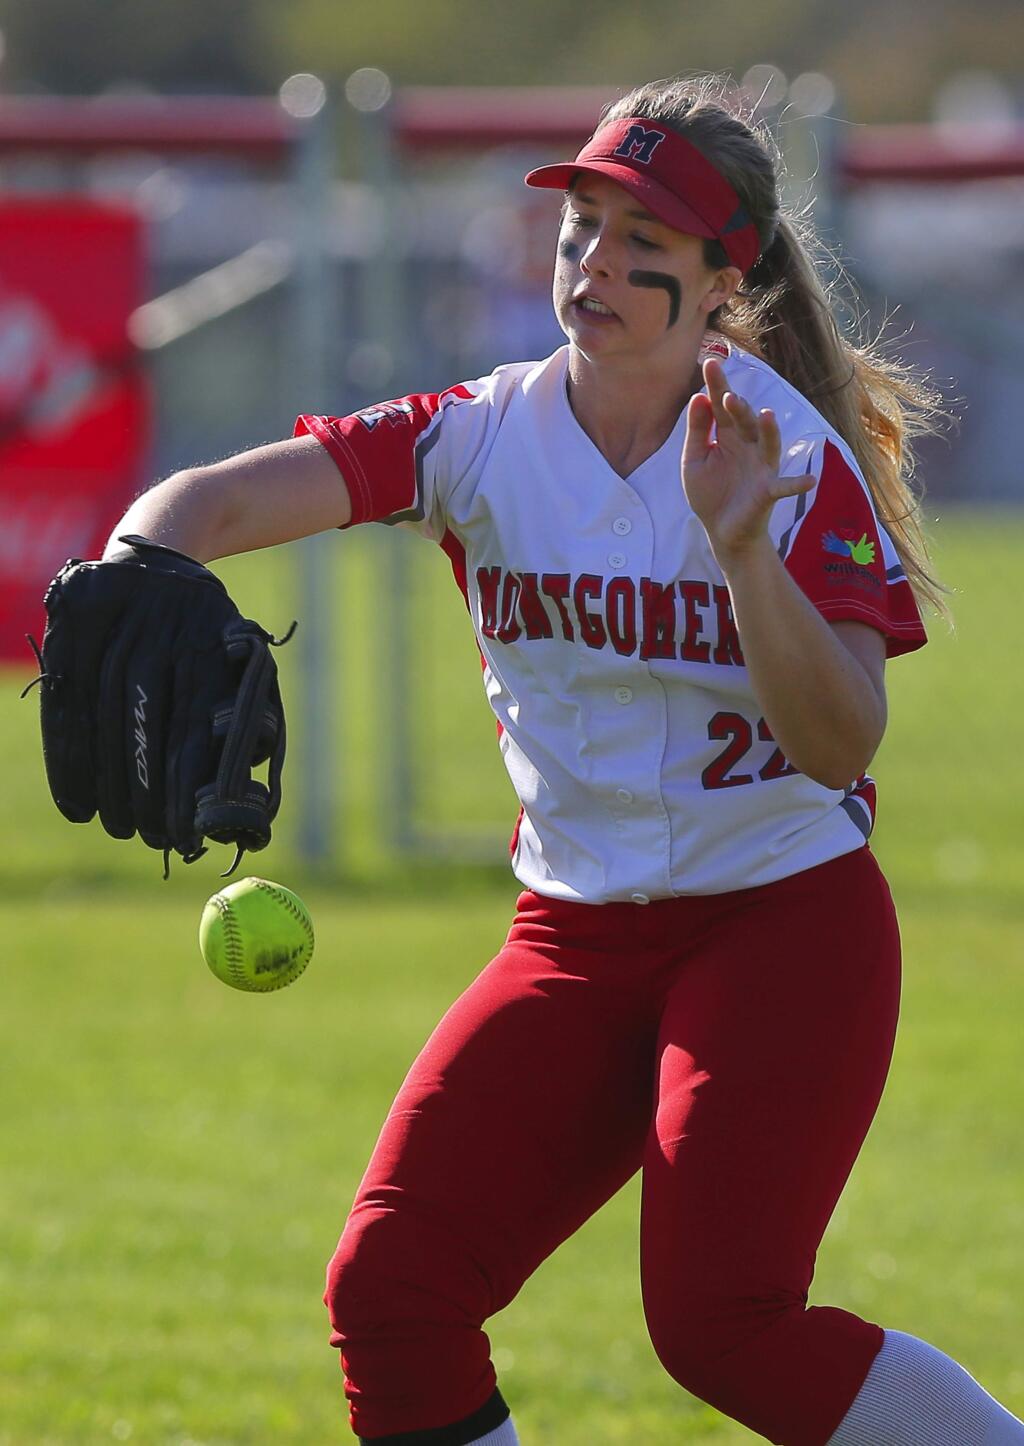 Montgomery's Madissen Larson drops a fly ball during a game against Cardinal Newman, in Santa Rosa on Thursday, March 29, 2018. (Christopher Chung/ The Press Democrat)